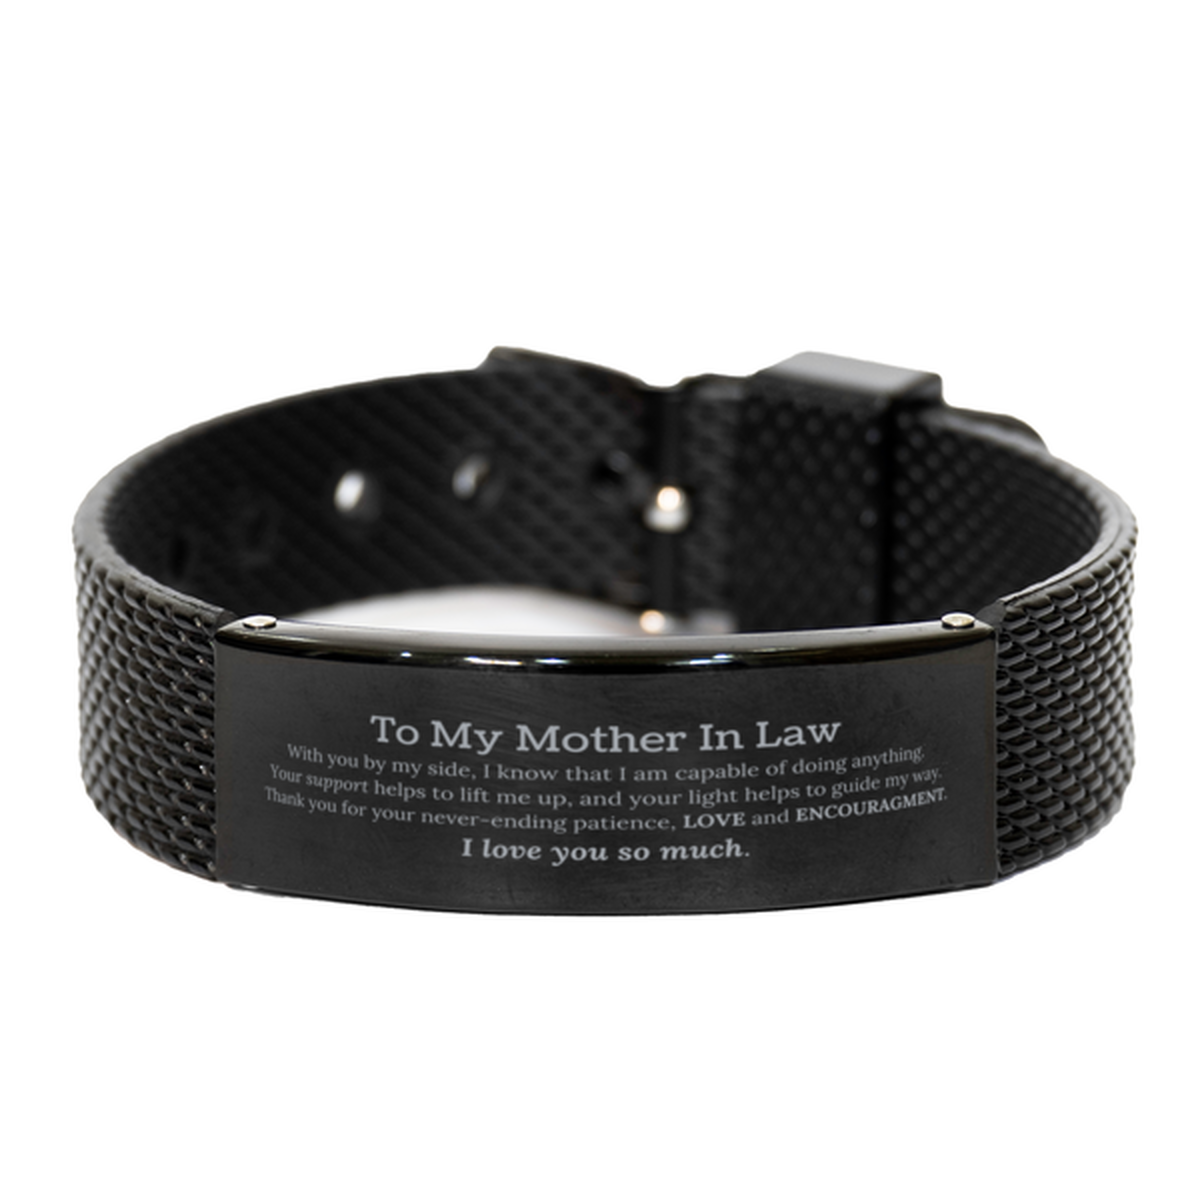 Appreciation Mother In Law Black Shark Mesh Bracelet Gifts, To My Mother In Law Birthday Christmas Wedding Keepsake Gifts for Mother In Law With you by my side, I know that I am capable of doing anything. I love you so much